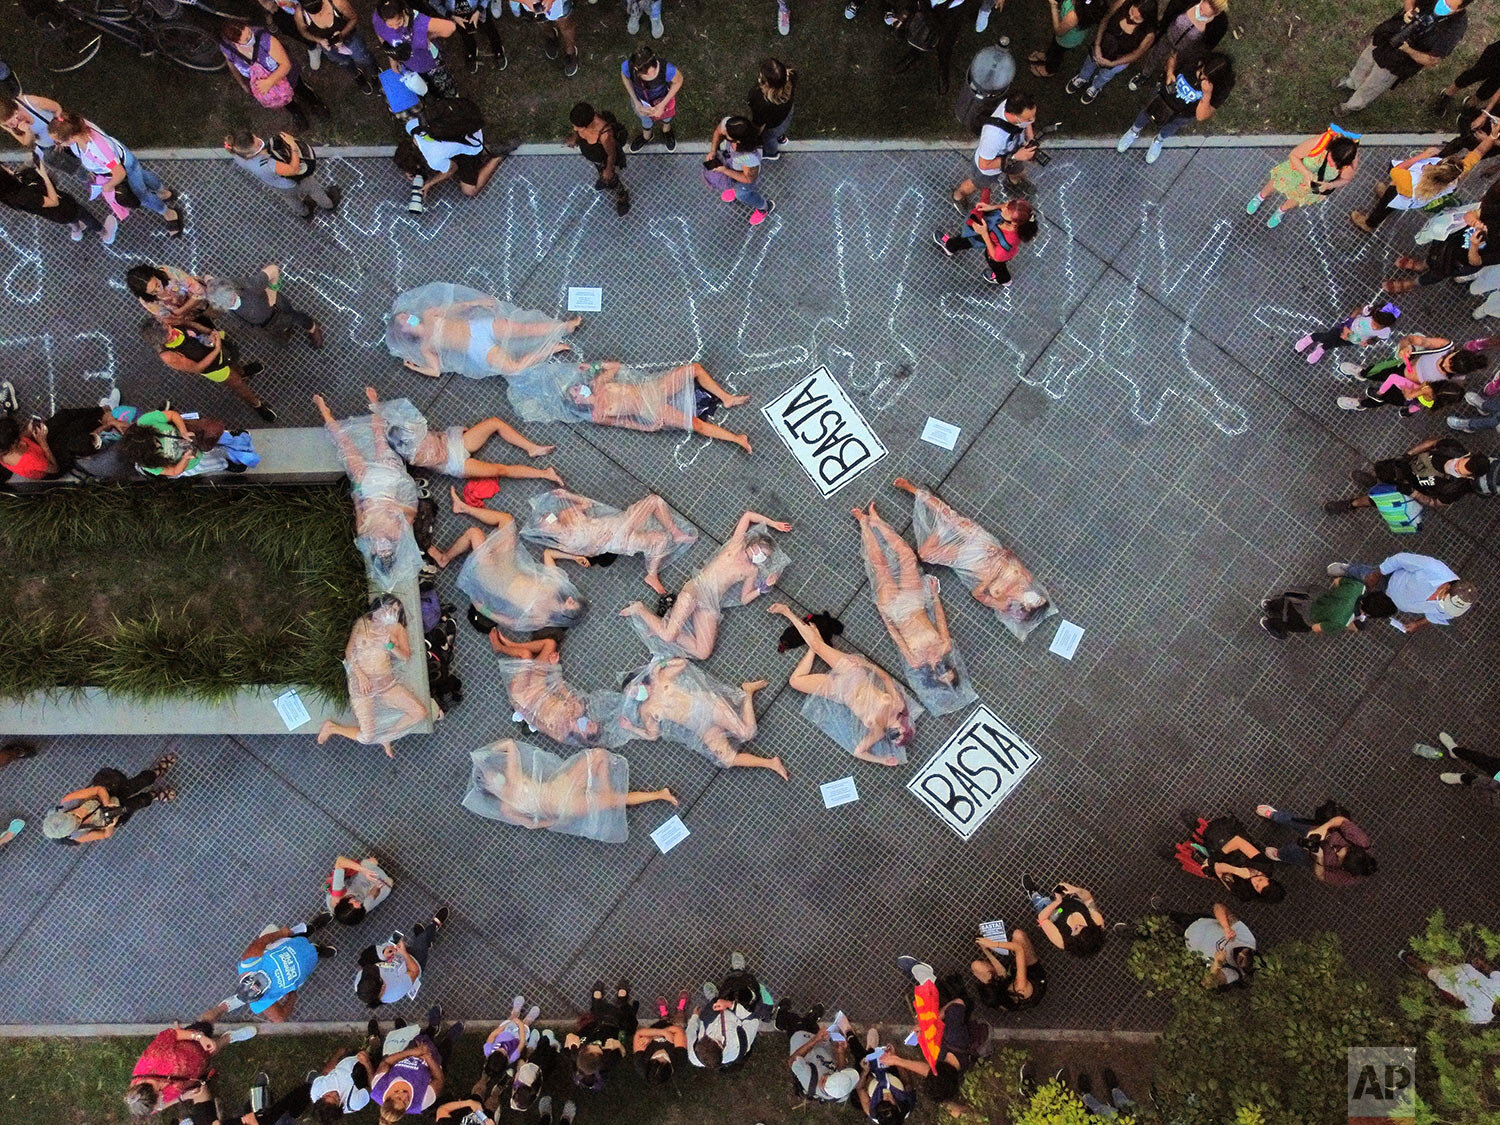  EDS NOTE: NUDITY - Female protesters lie on a sidewalk covered in plastic bags in protest gender violence in Buenos Aires, Argentina, Feb. 17, 2021. Women from the “Ni Una Menos” or “Not One Less” movement protested what they call negligence by judg